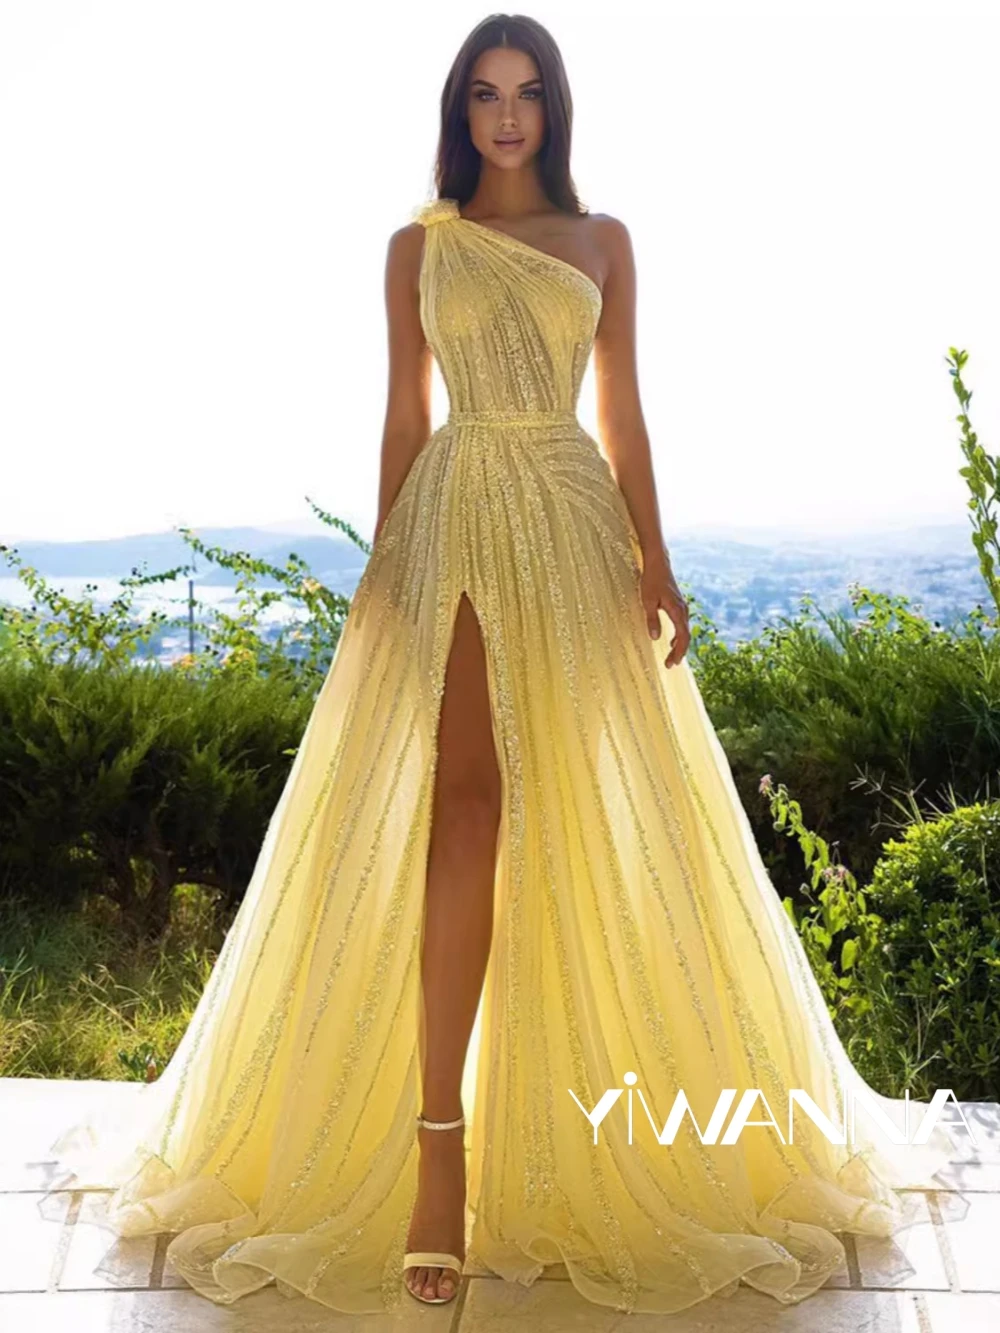 

Sparkly Sequins Beads Cocktail Dress Sexy One Shoulder High Slit Evening Gown Elegant Yellow Tulle Prom Dresses Robe De Mariée